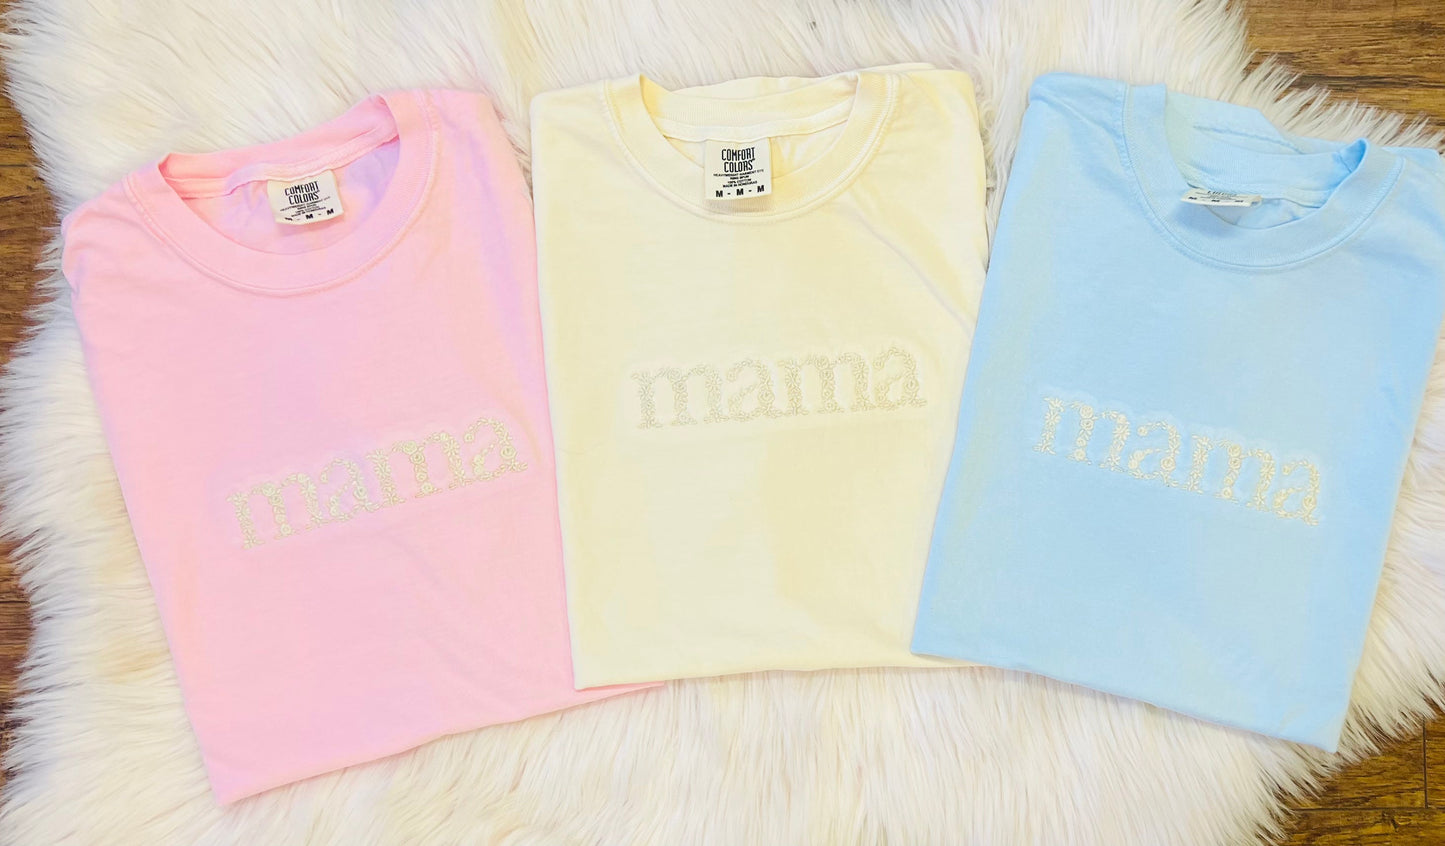 Mama Floral Embroidered Tee